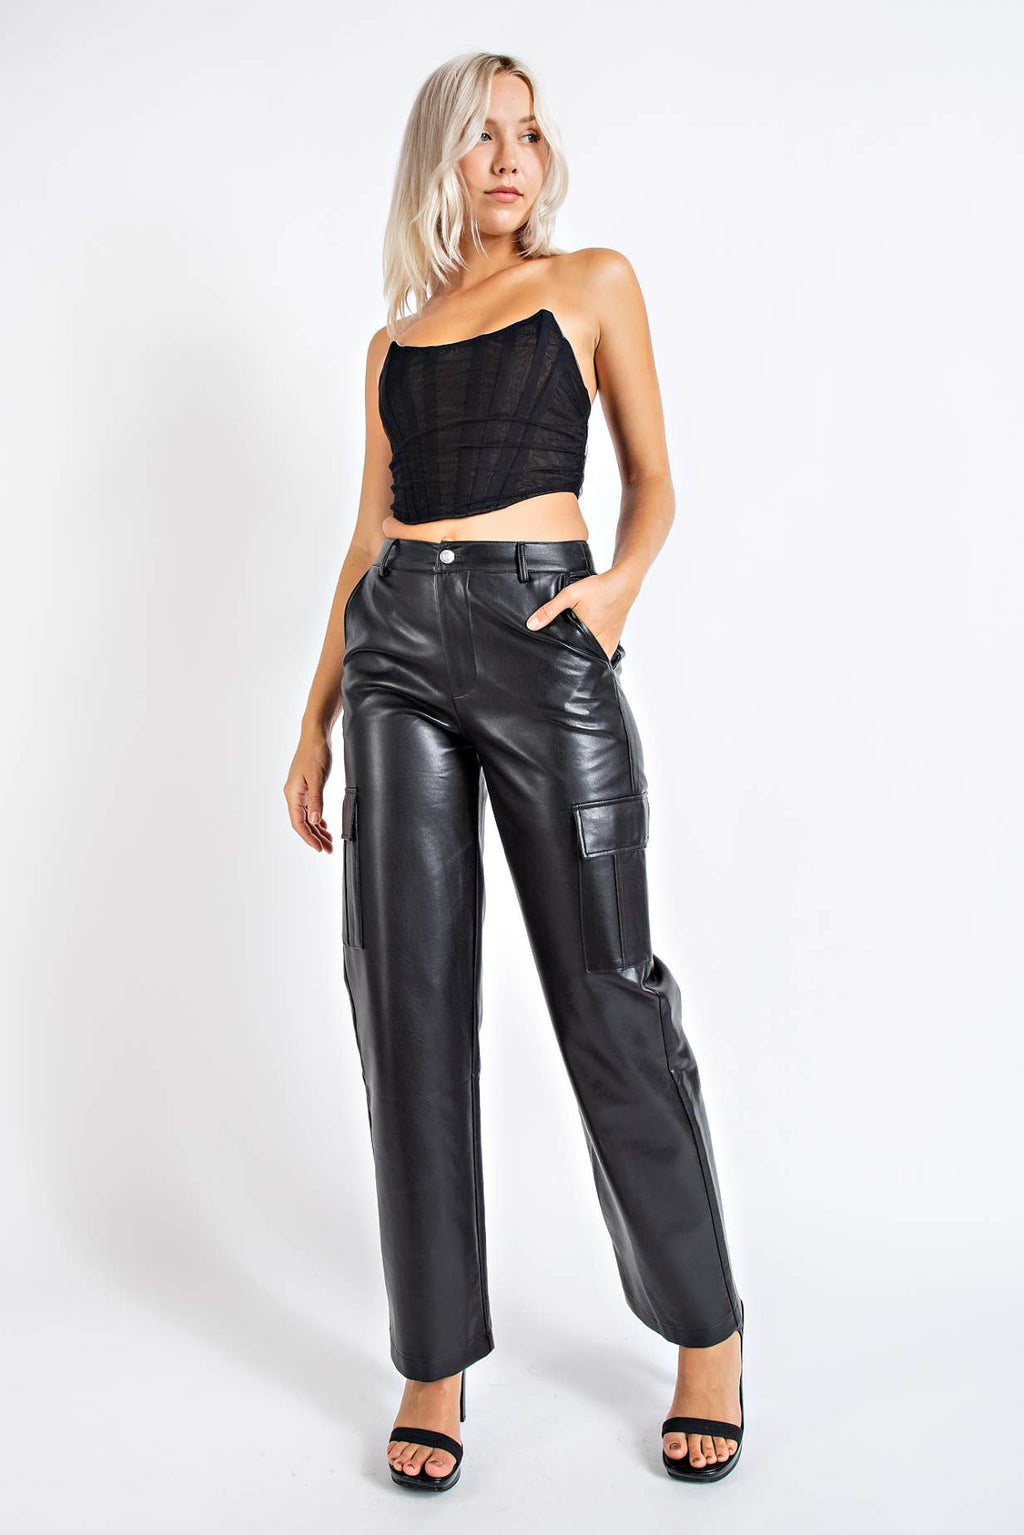 Yummie Stretch and Shine Faux Leather Shaping Legging